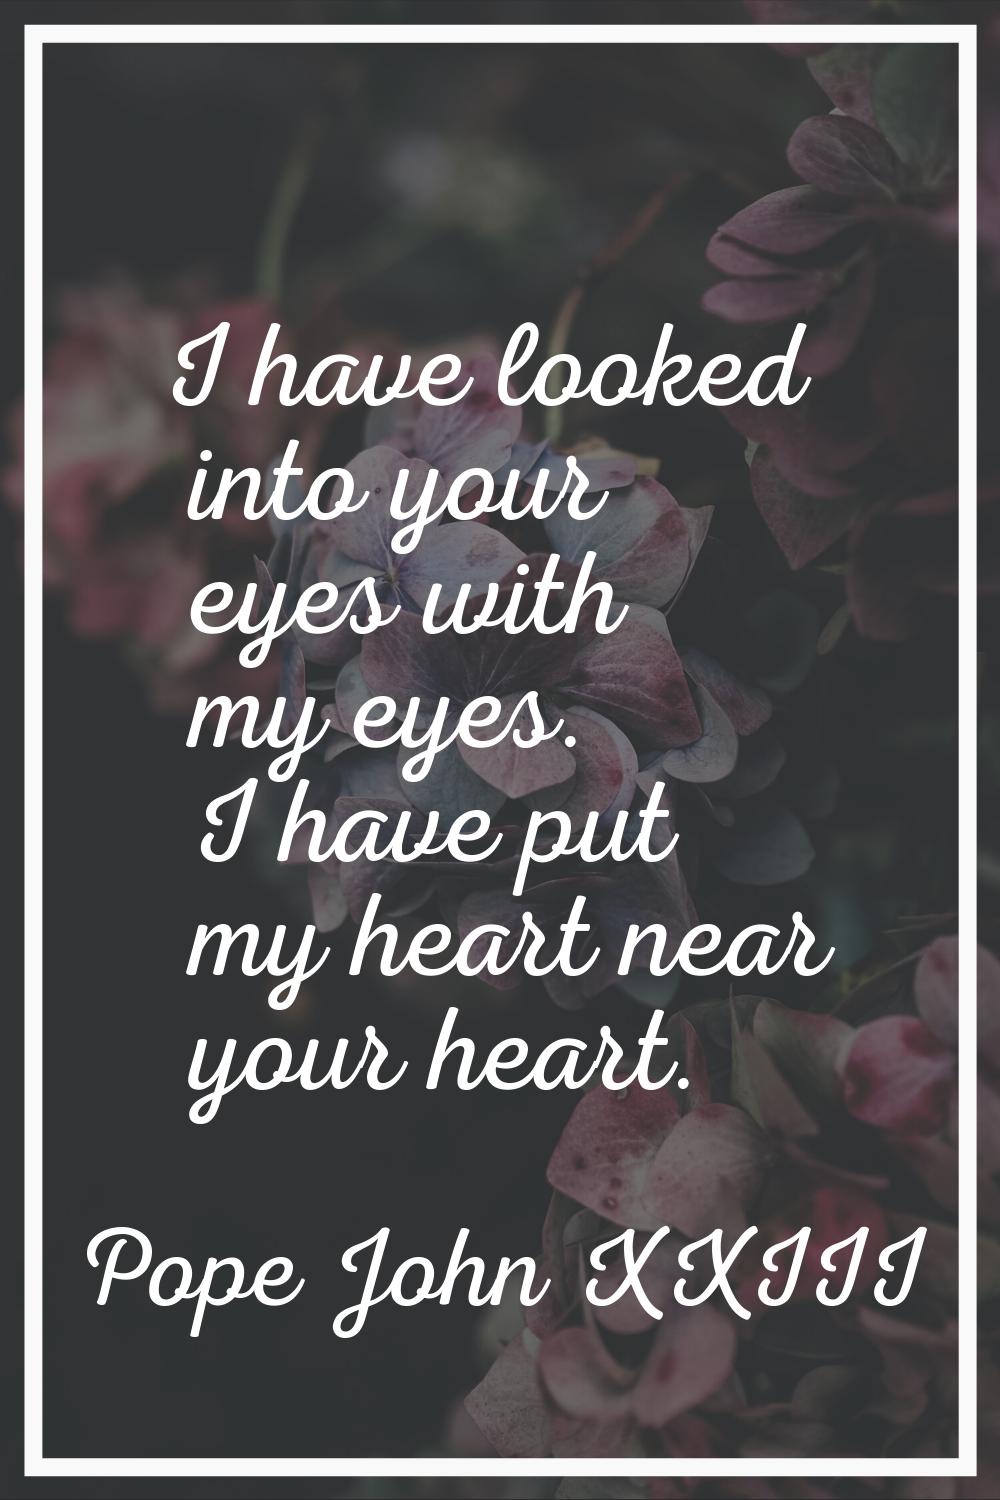 I have looked into your eyes with my eyes. I have put my heart near your heart.